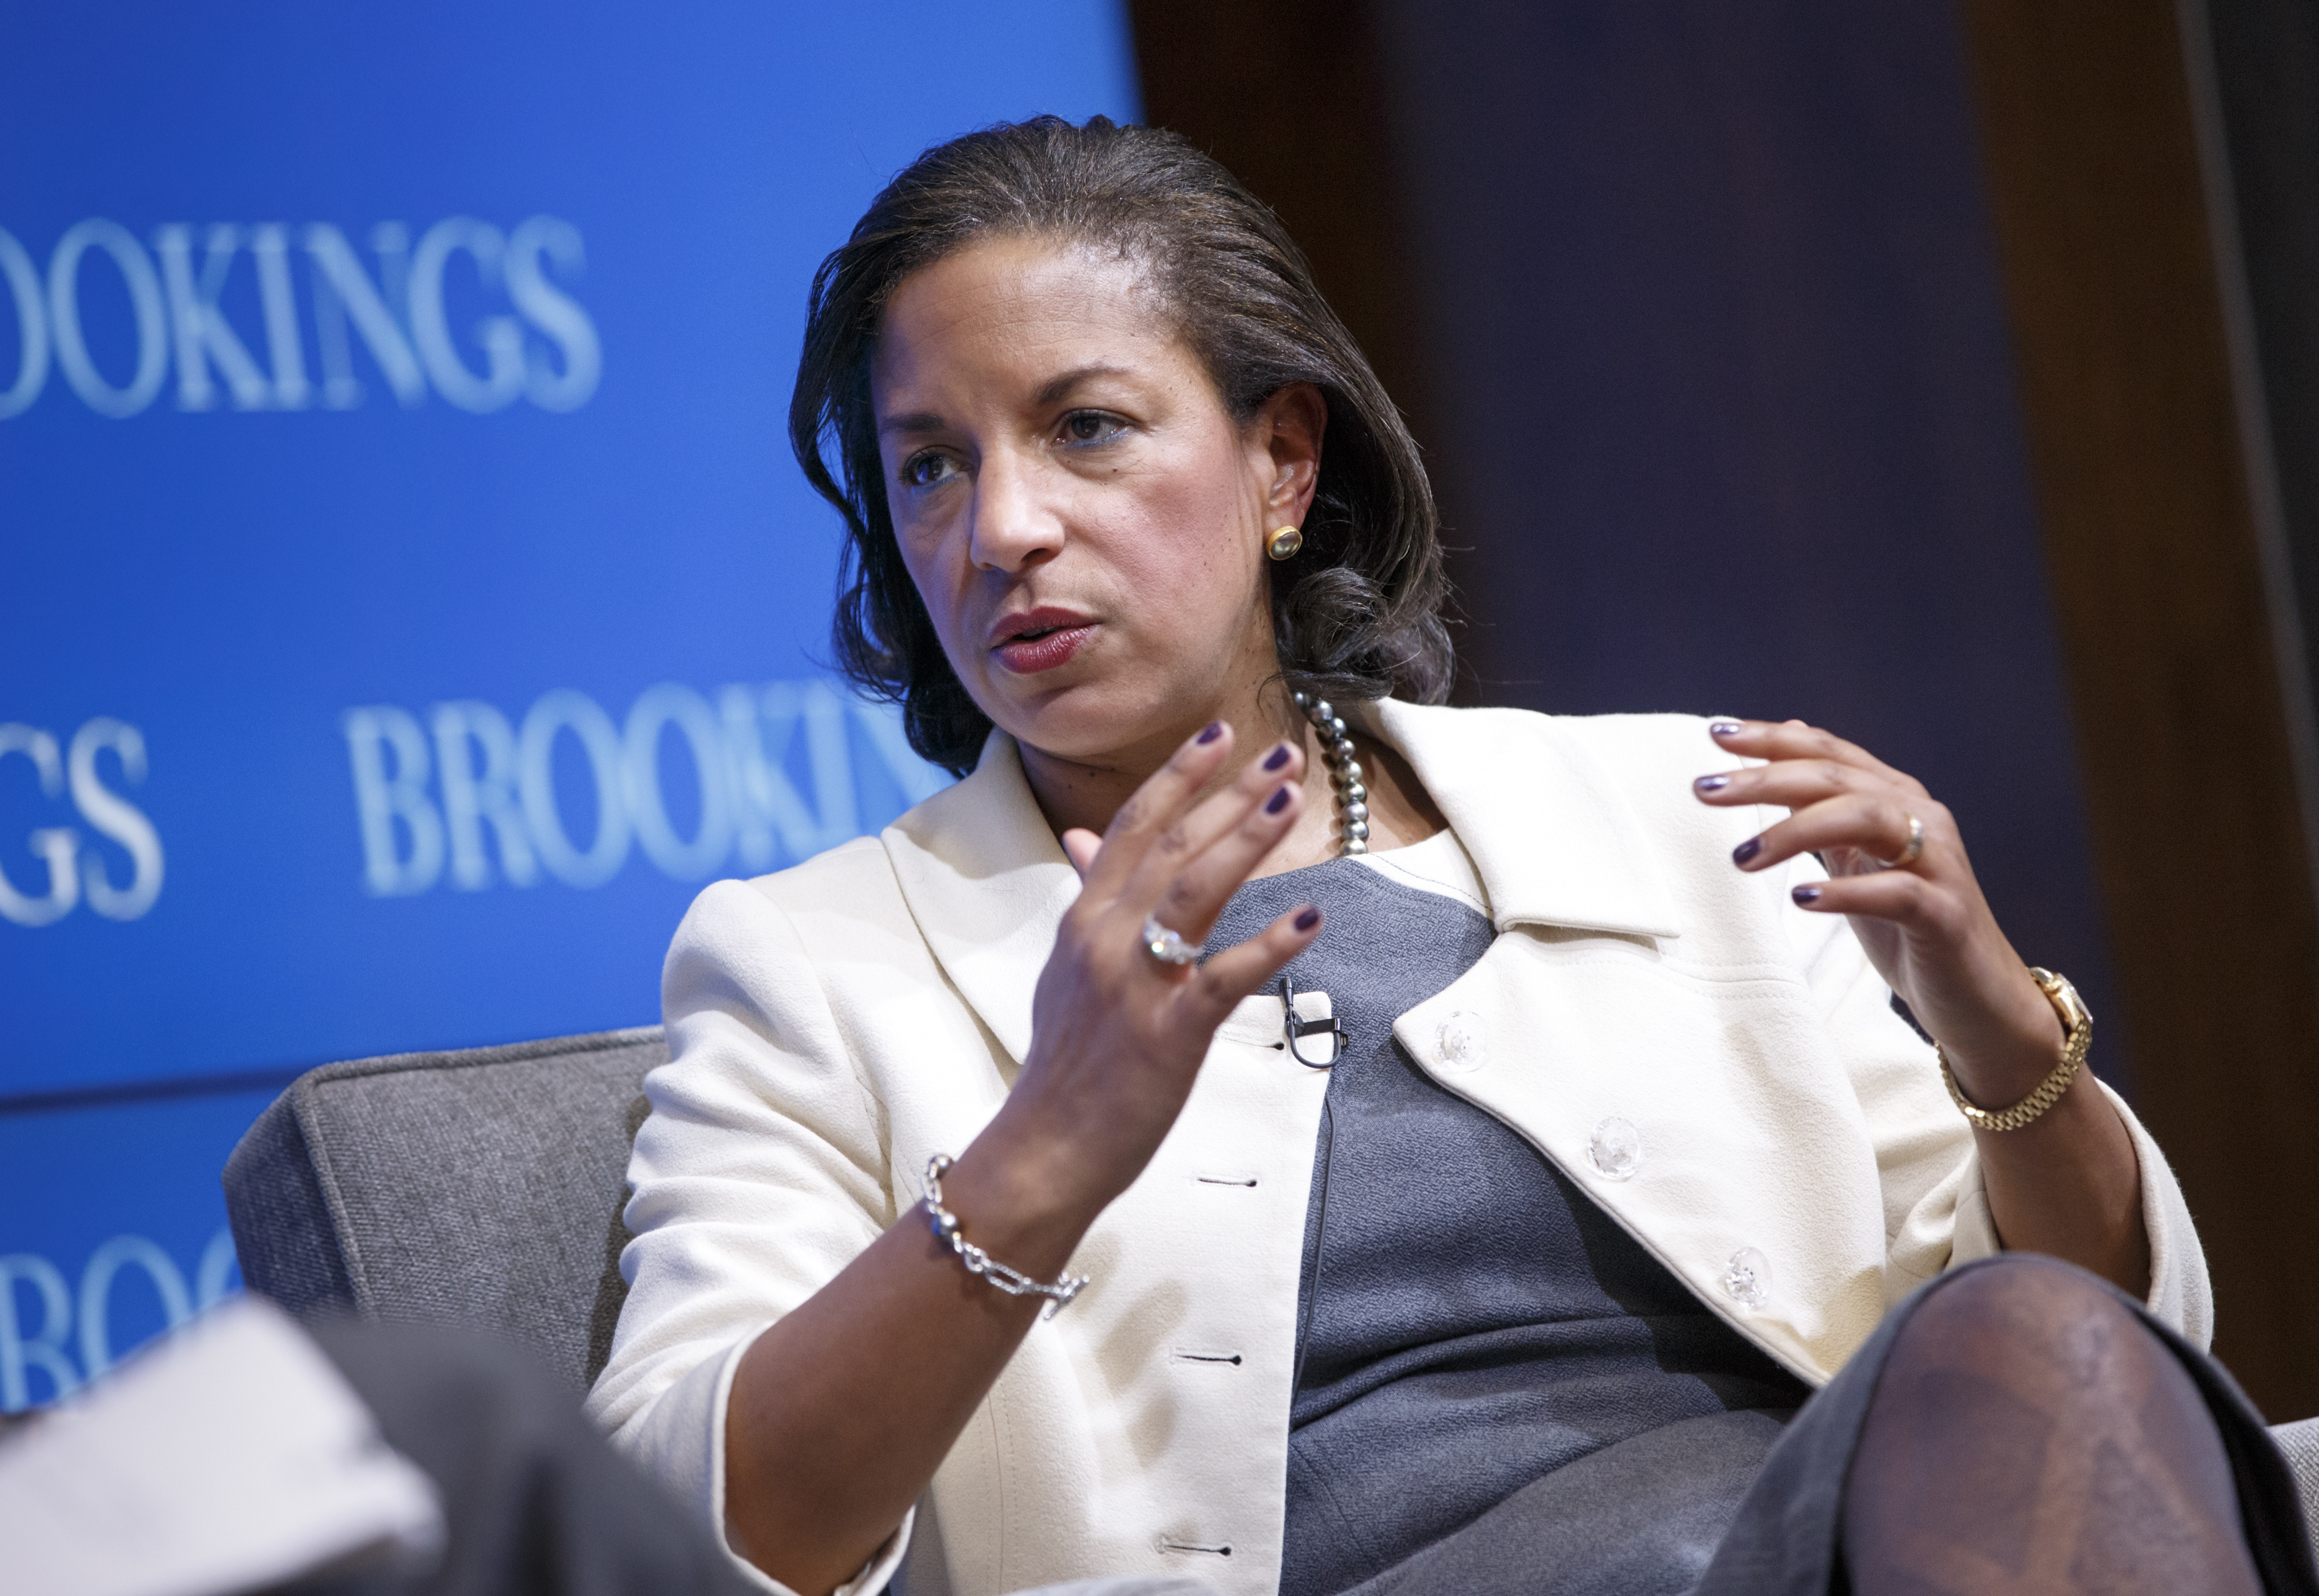 National Security Adviser Susan Rice speaks at the Brookings Institution to outline President Barack Obama's foreign policy priorities on Feb. 6, 2015, in Washington. (J. Scott Applewhite—AP)